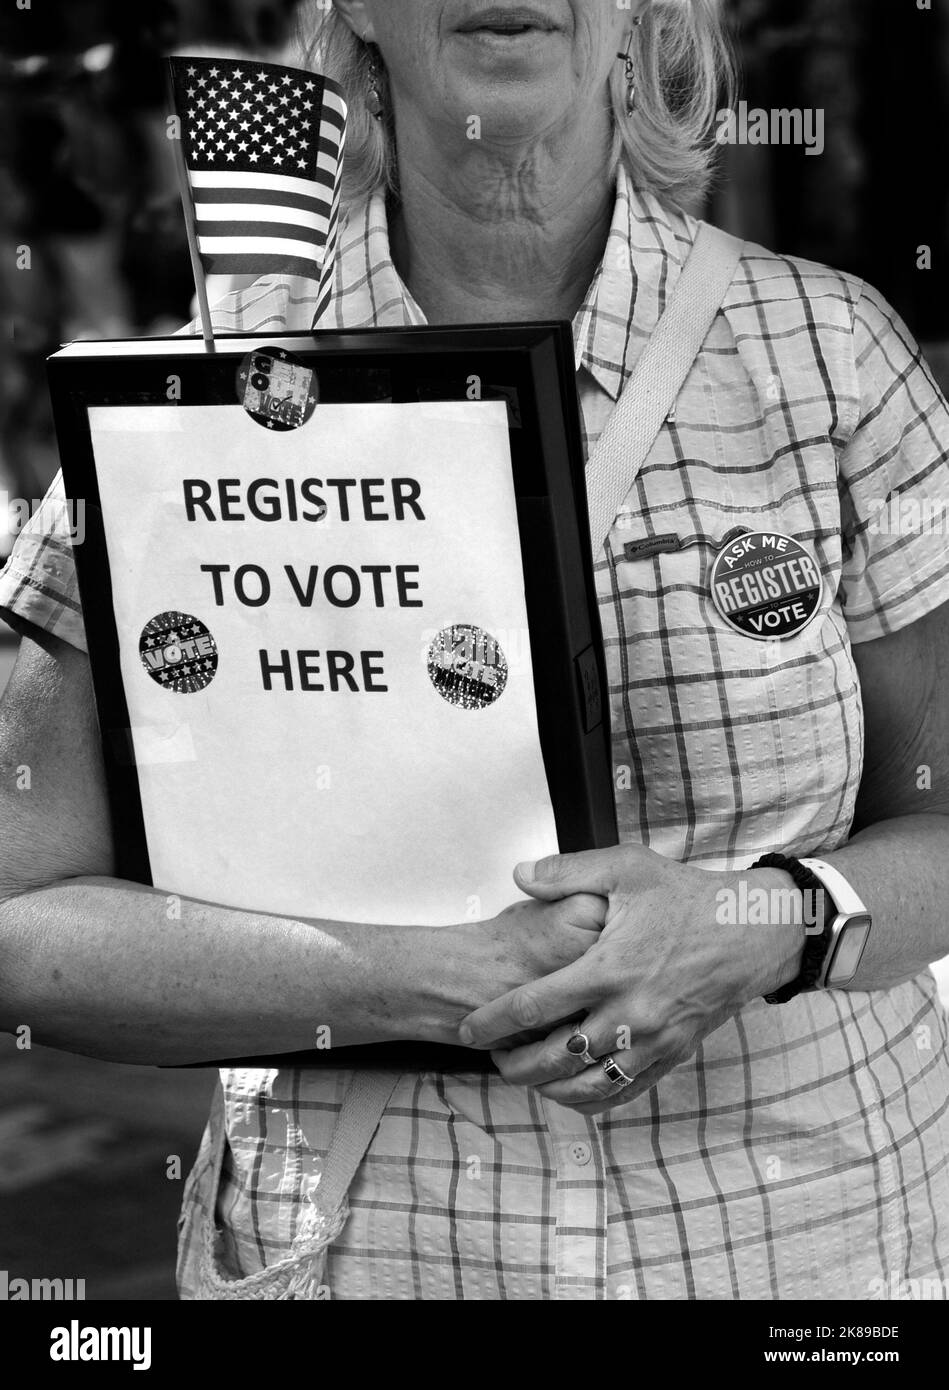 A volunteer signs up people wanting to register to vote in upcoming U.S. elections in Santa Fe, New Mexico Stock Photo